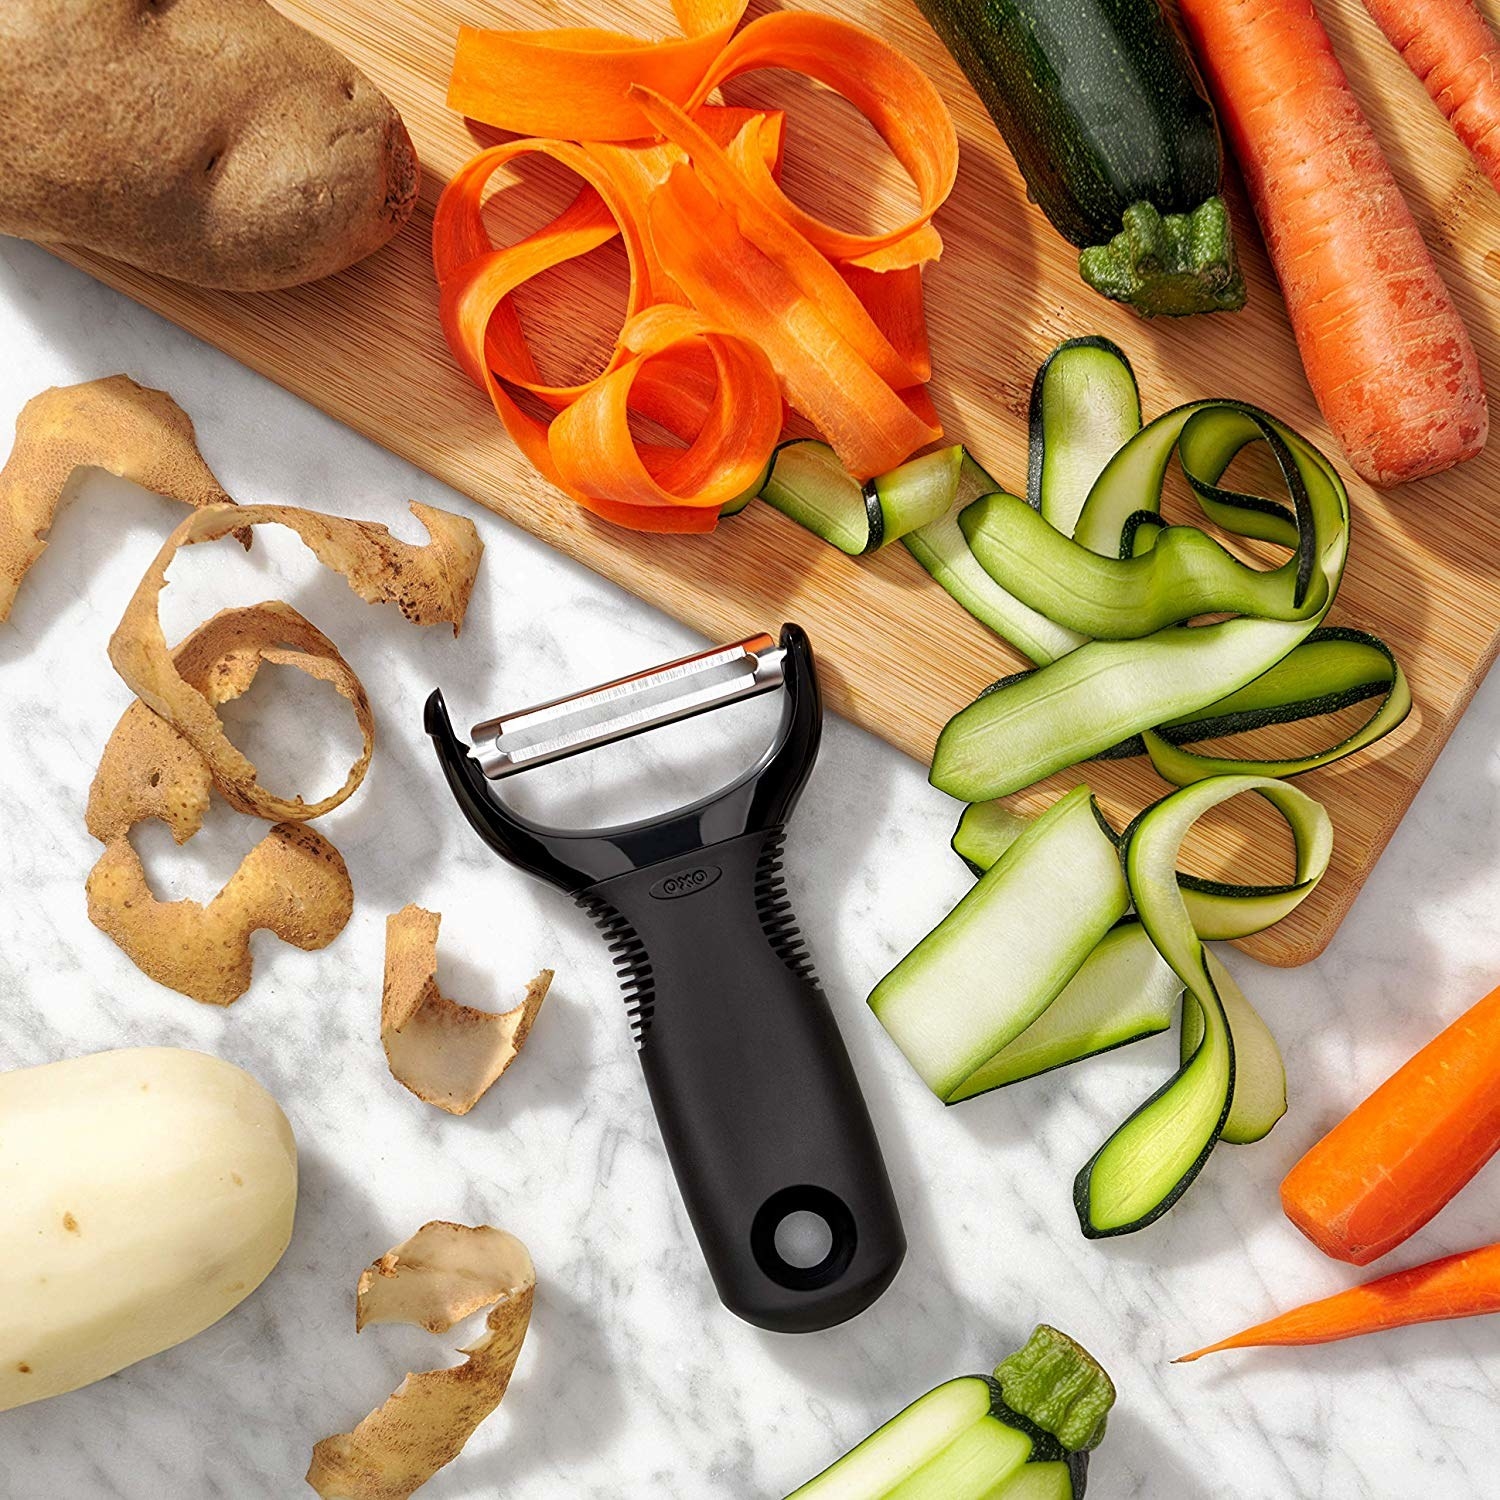 the peeler on a surface with peeled veggies